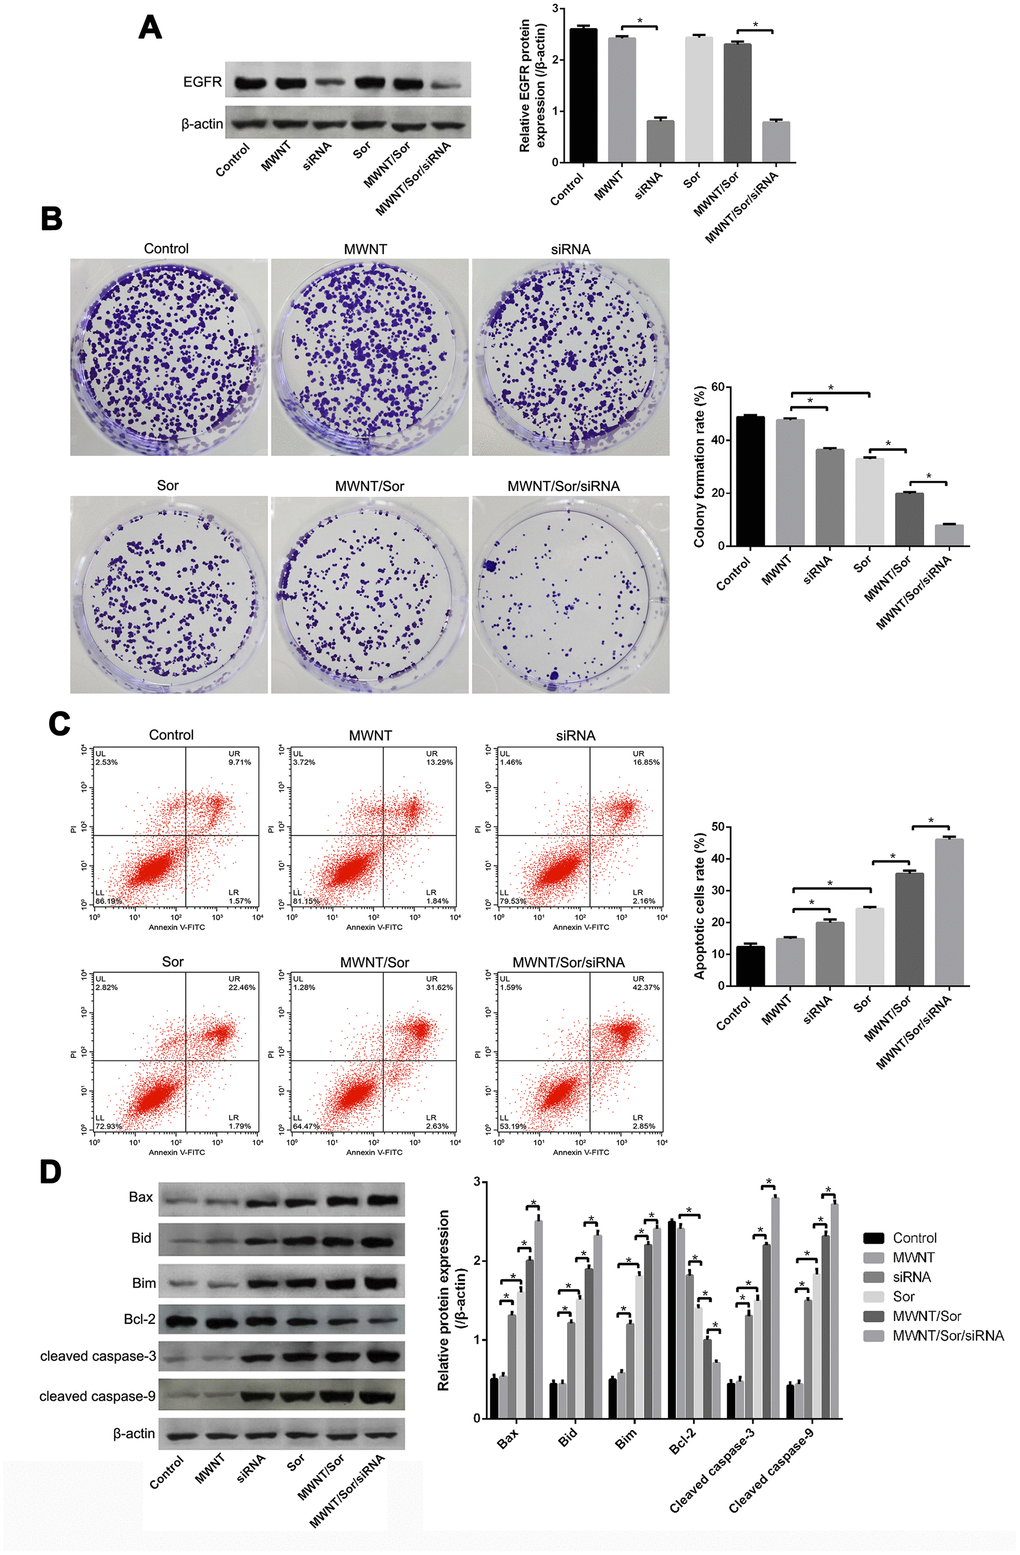 MWNT/Sor/siRNA inhibited growth of HepG2 cells. (A) The protein expression of epidermal growth factor receptor (EGFR) in HepG2 cells treated with PBS (control), MWNTs, siRNA, Sor, MWNT/Sor, or MWNT/Sor/siRNA by western blotting. (B) Colony number of HepG2 cells in control group, MWNTs, siRNA, Sor, MWNT/Sor, or MWNT/Sor/siRNA detected by colony formation assay. (C) Cell apoptosis rate of HepG2 cells in control group, MWNTs, siRNA, Sor, MWNT/Sor, or MWNT/Sor/siRNA tested by flow cytometry assay. (D) The proteins expression including Bax, Bid, Bim, cleaved caspase-3, and cleaved caspase-9, in HepG2 cells in control group, MWNTs, siRNA, Sor, MWNT/Sor, or MWNT/Sor/siRNA measured by western blot. *P 